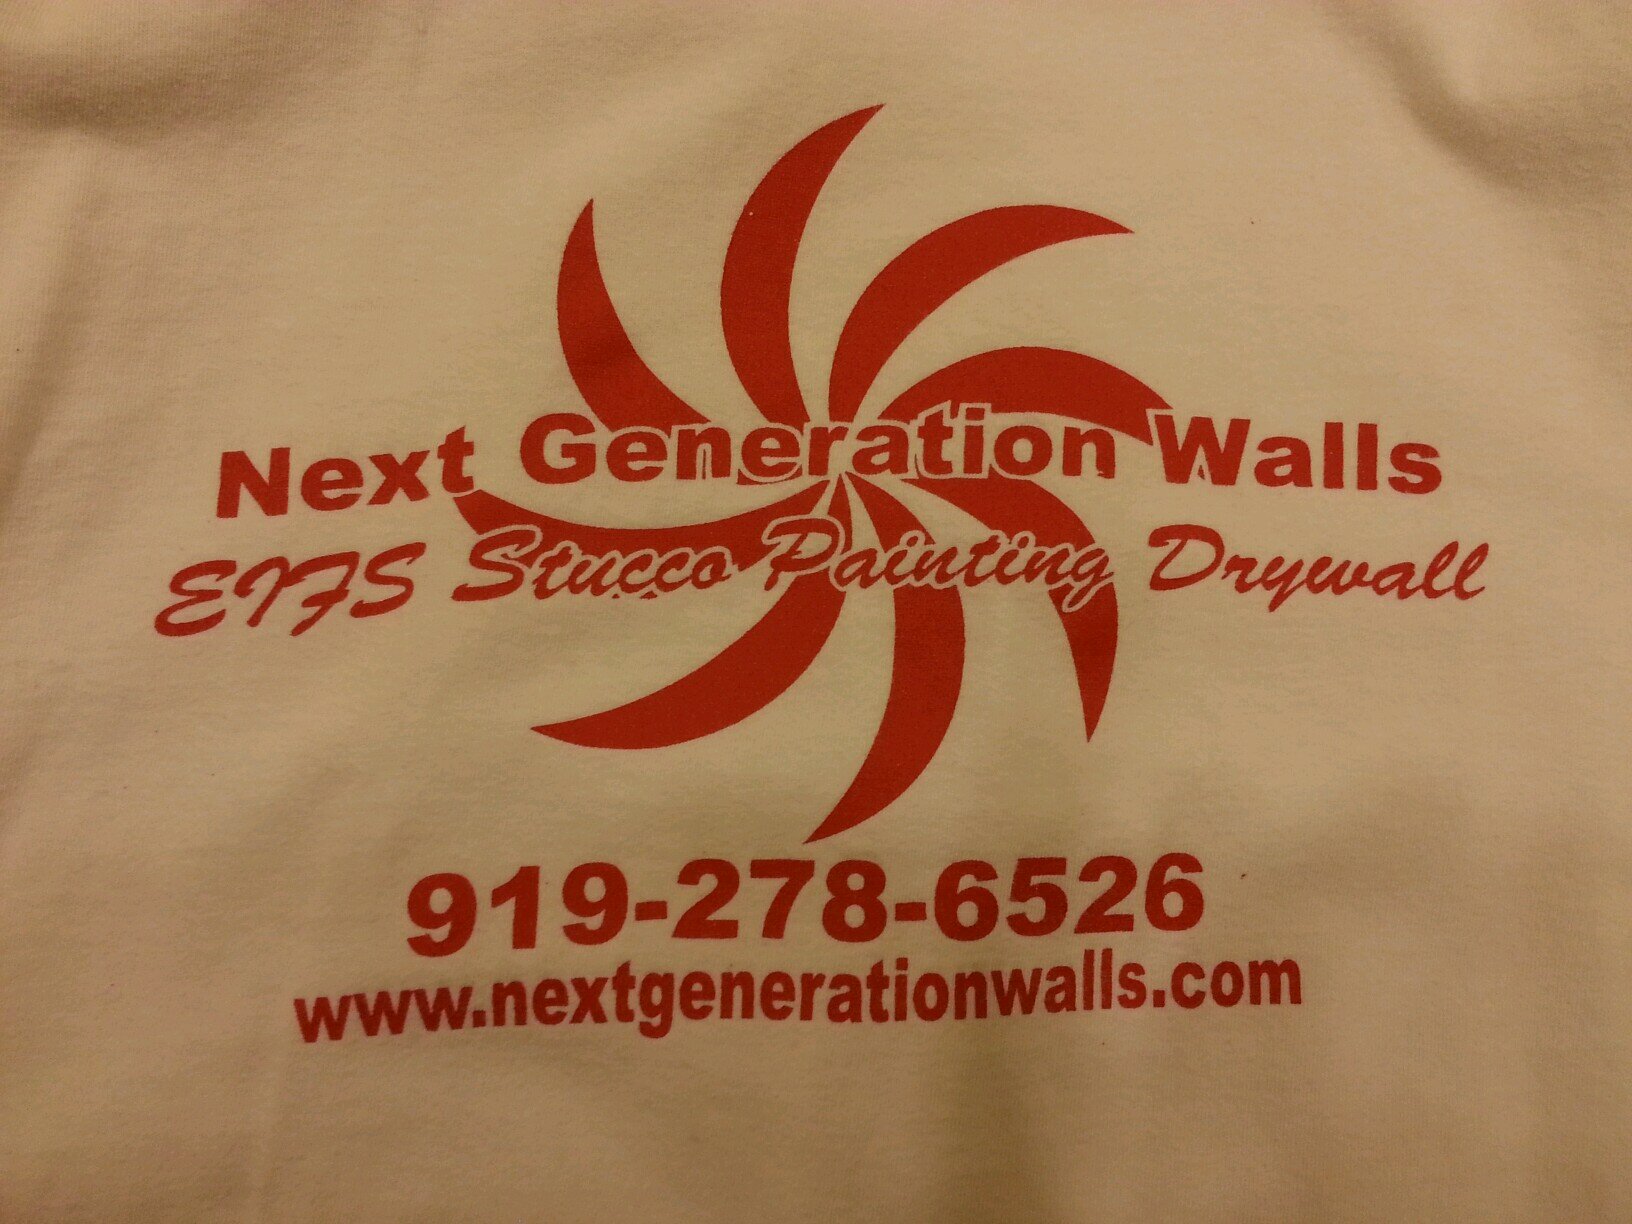 Stucco/ EIFS, Drywall, Painting, Hydrostop roofs, Textured walls/Ceilings, Cleaning, Power Washing, Hotel Maintenance, Property Maintenance. #919-278-6526